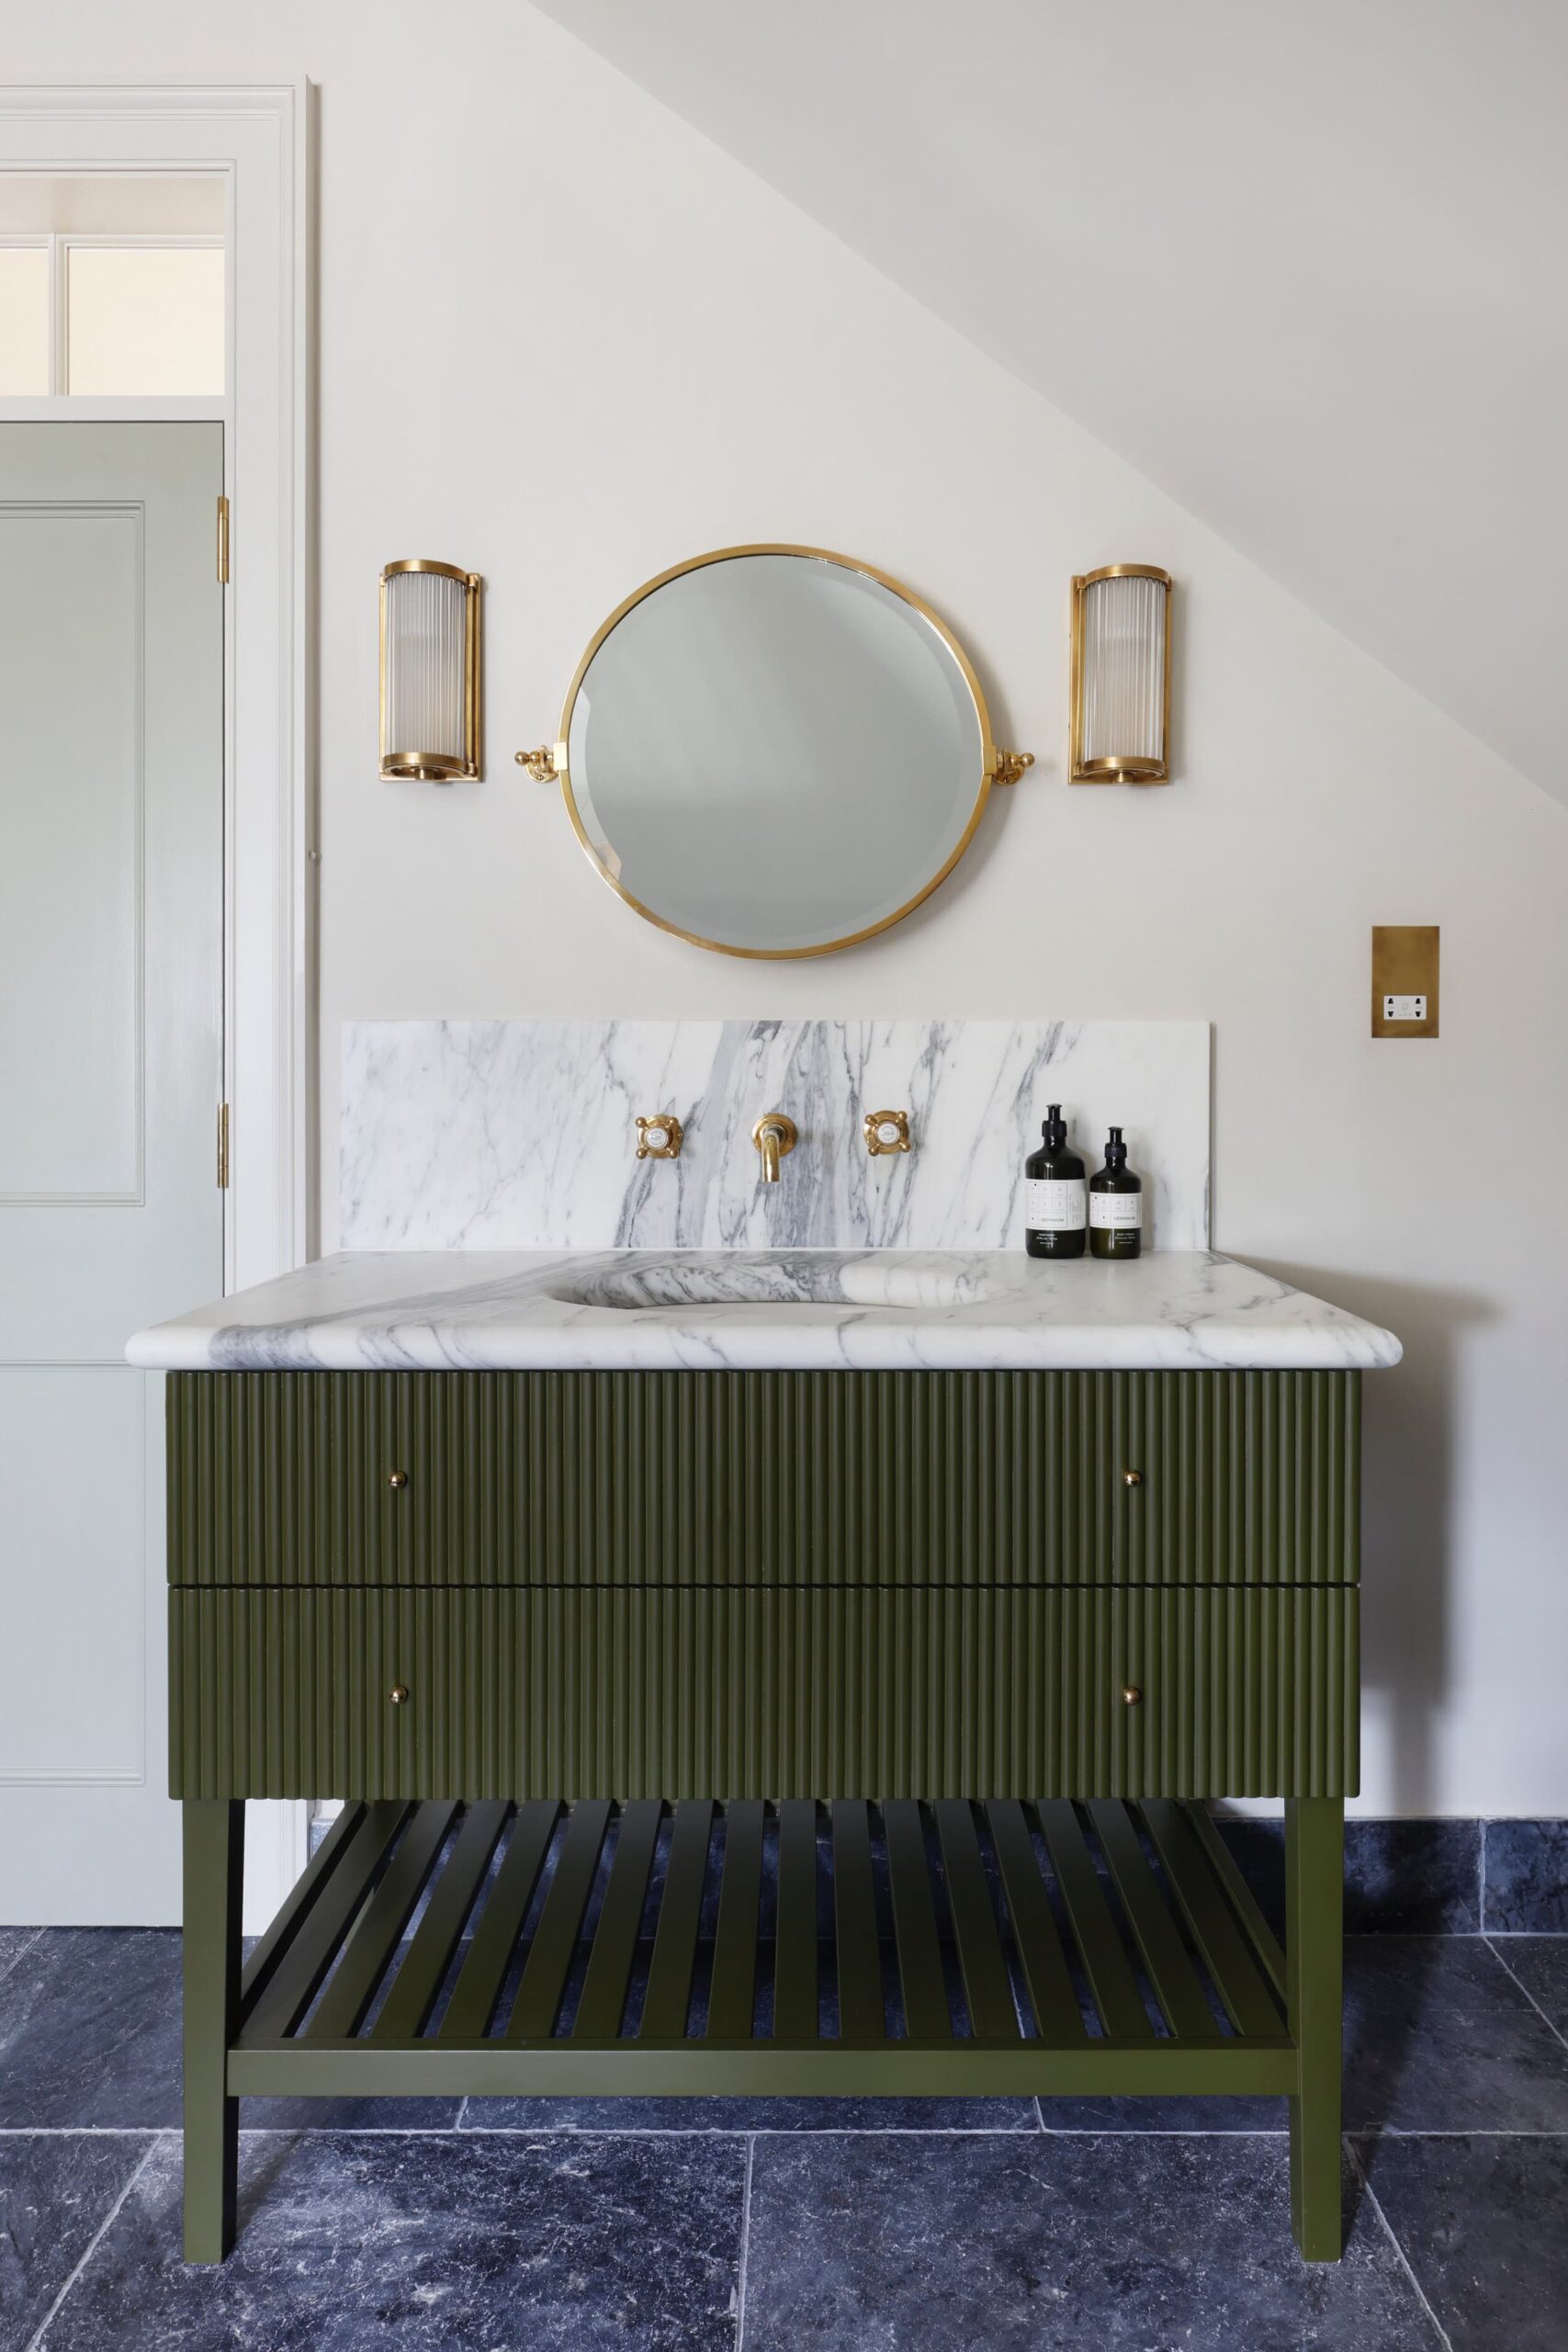 this is a statement green vanity in an eclectic bathroom